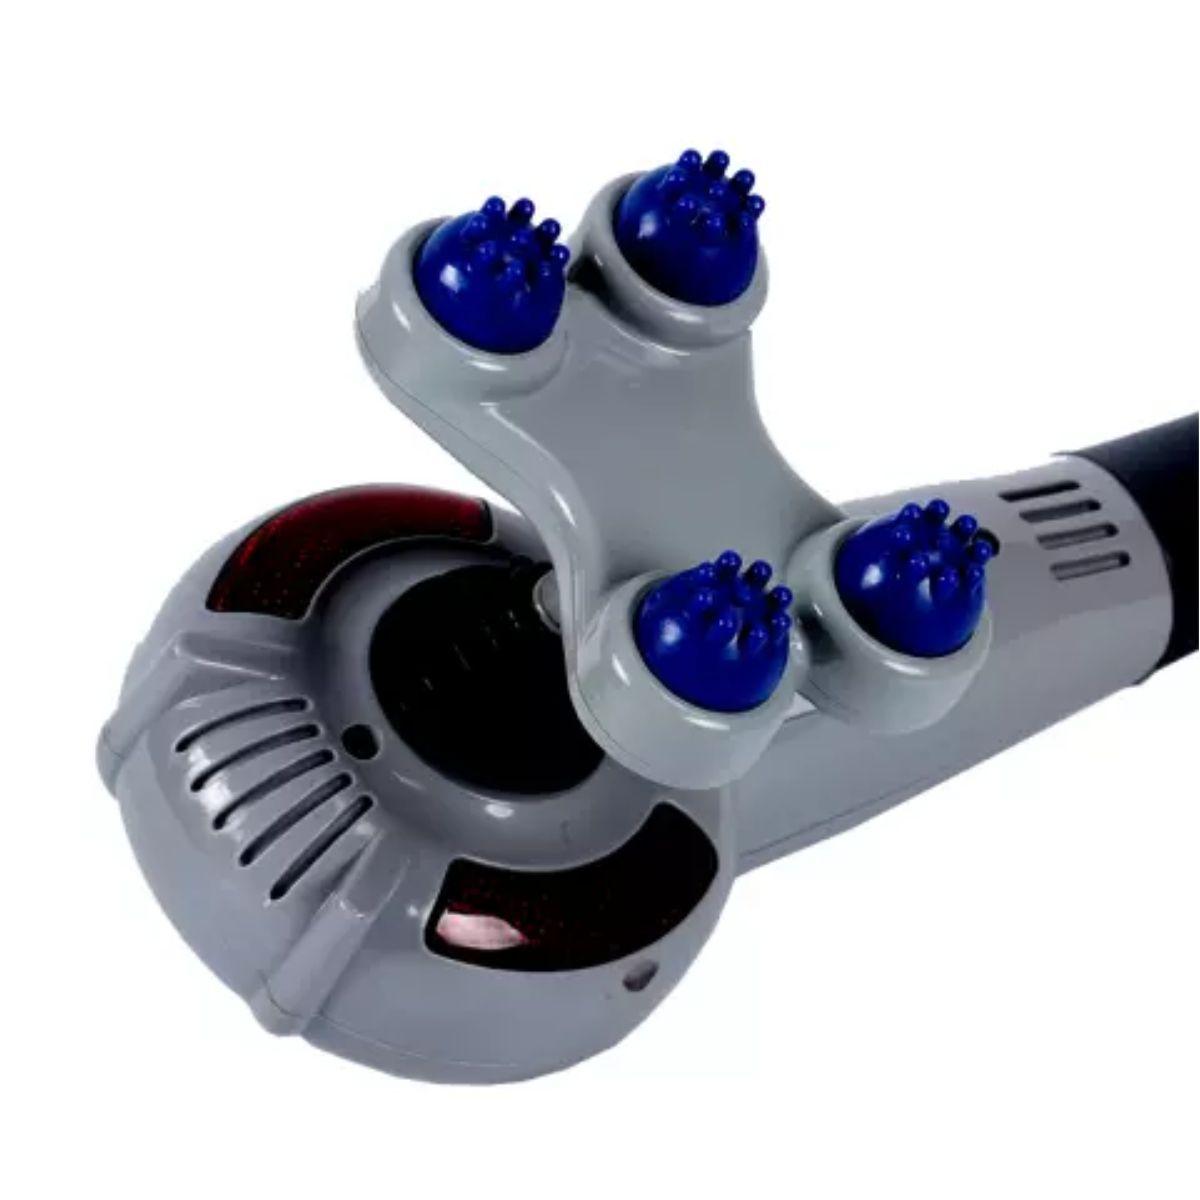 Professional Massager with 7 attachments - tcistarhealthproducts